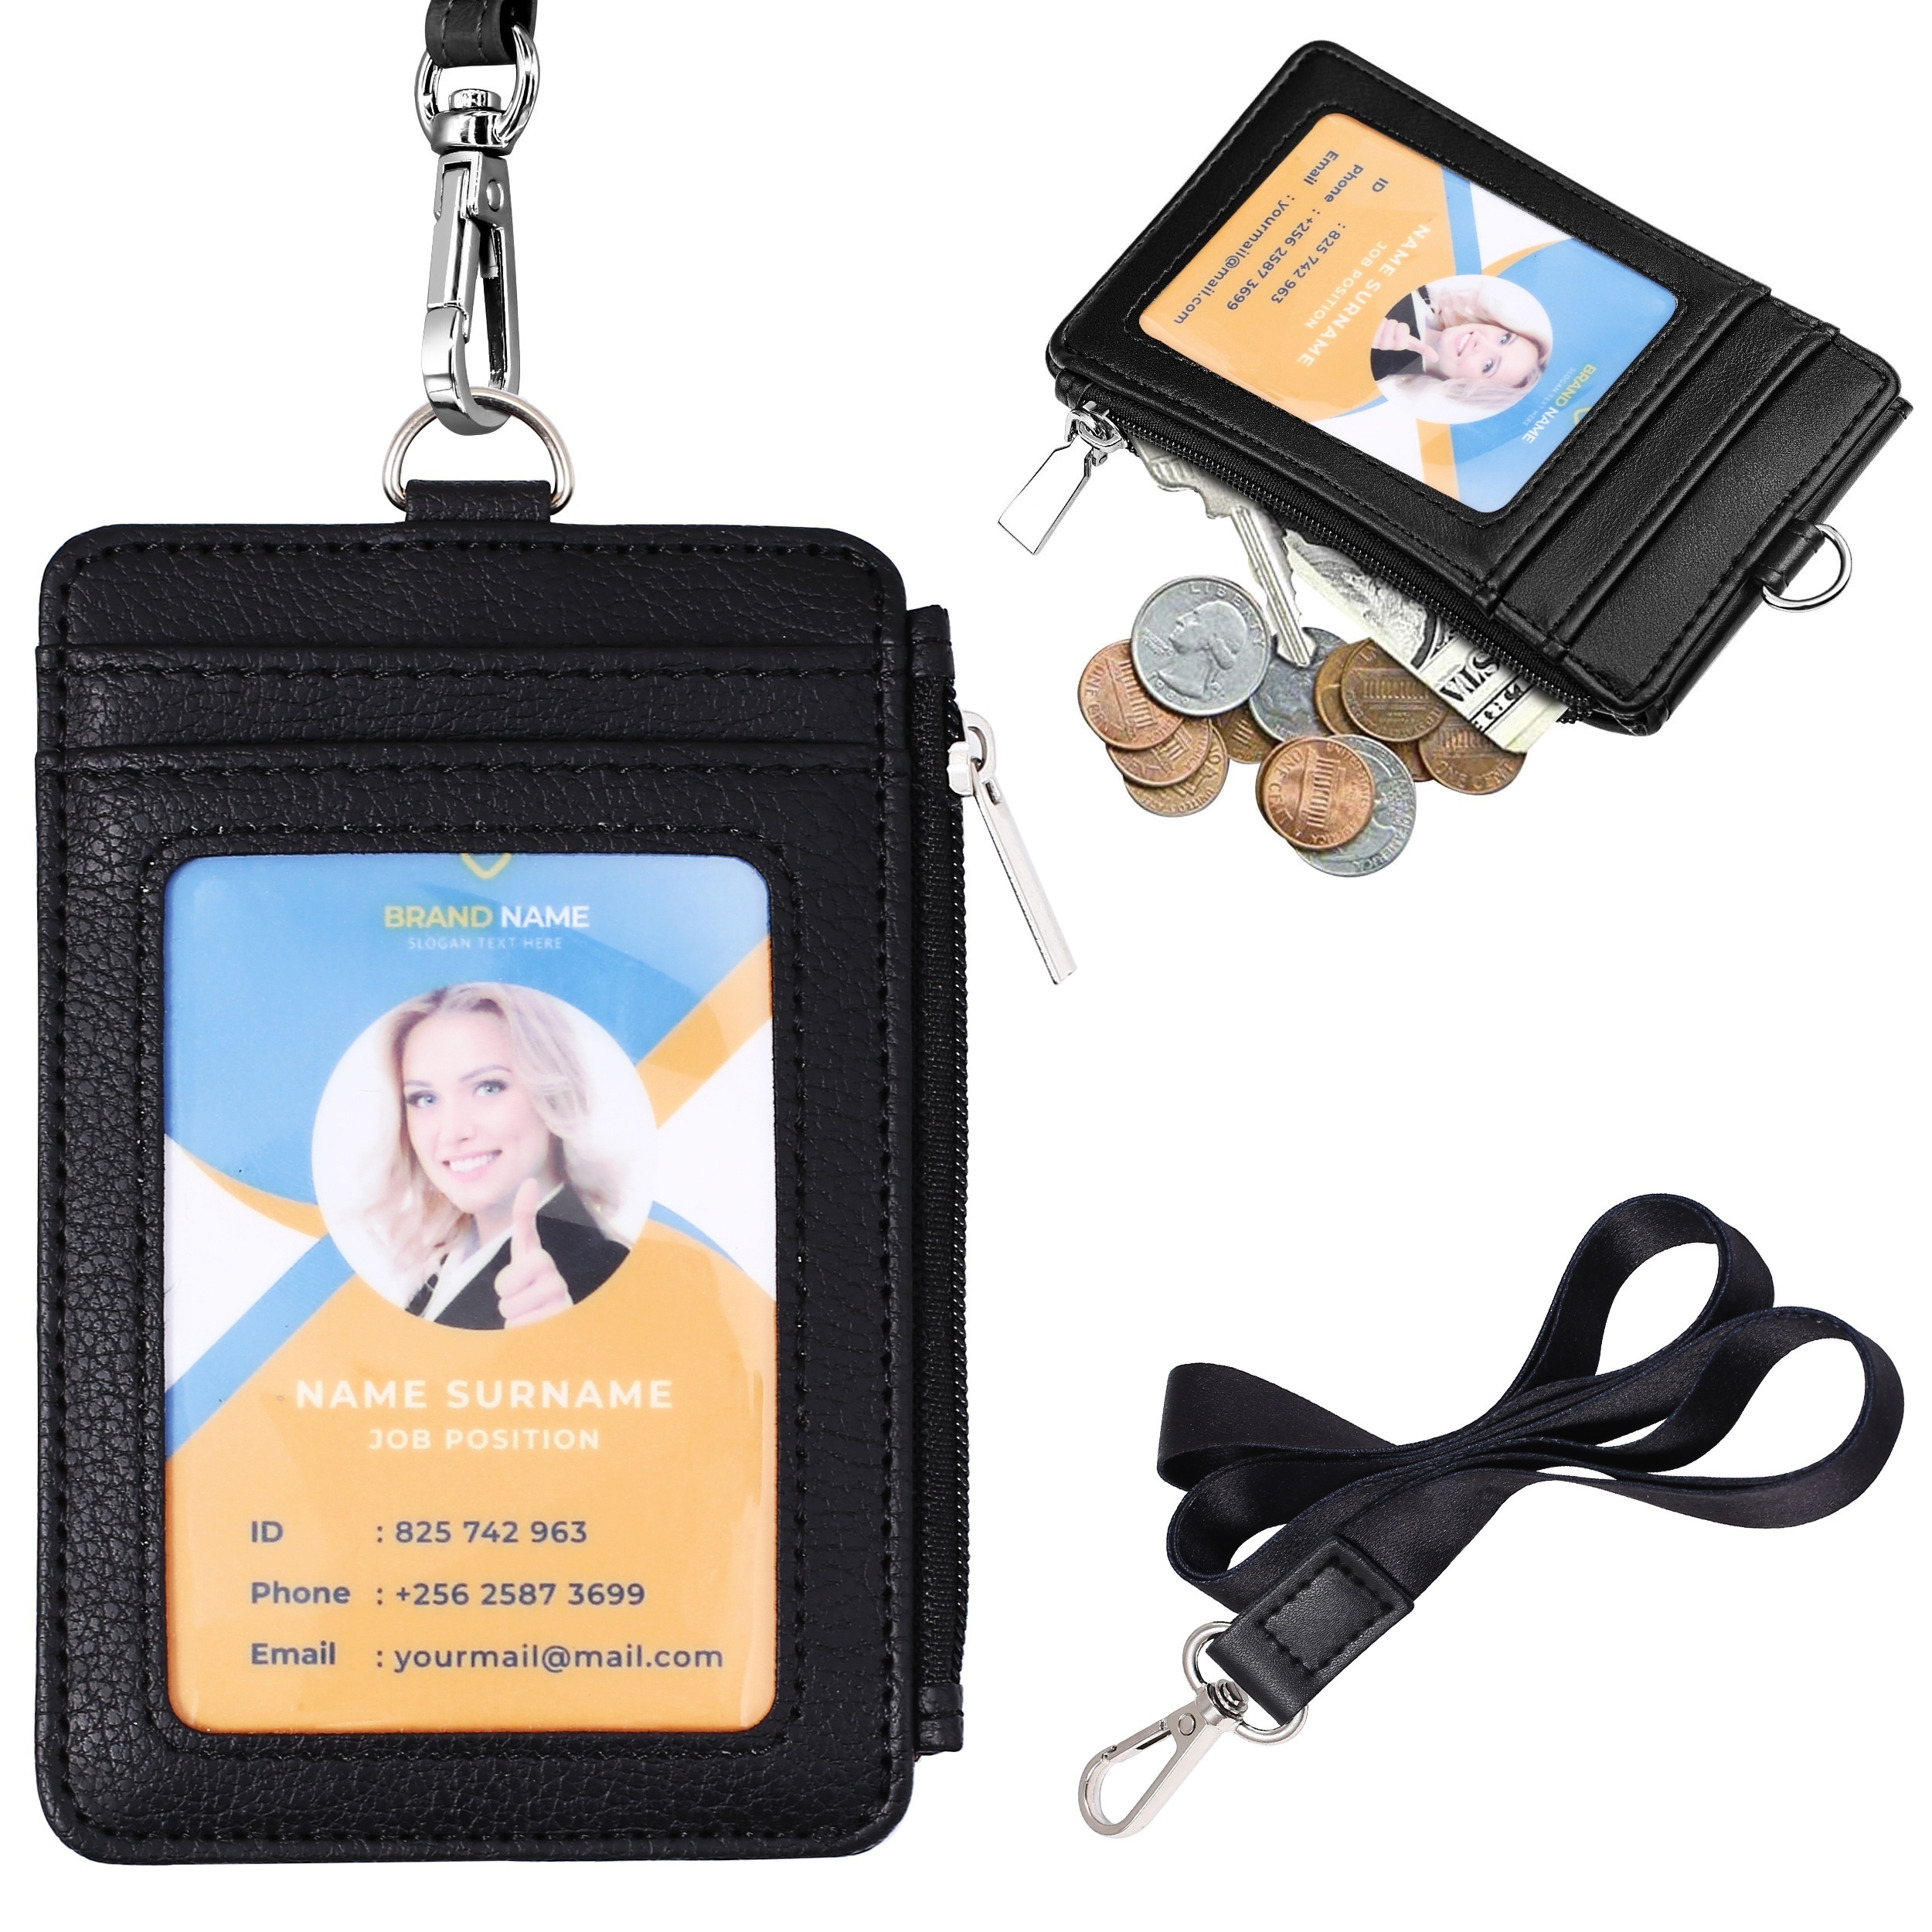  Black Lanyards for Id Badges, Pu Leather ID Badge Card Holder  Wallet with 1 Clear ID Window, 4 Credit Card Slots, 1 Side Zipper  Pocket,Detachable Wrist Strap, Neck Lanyard,Phone Holder